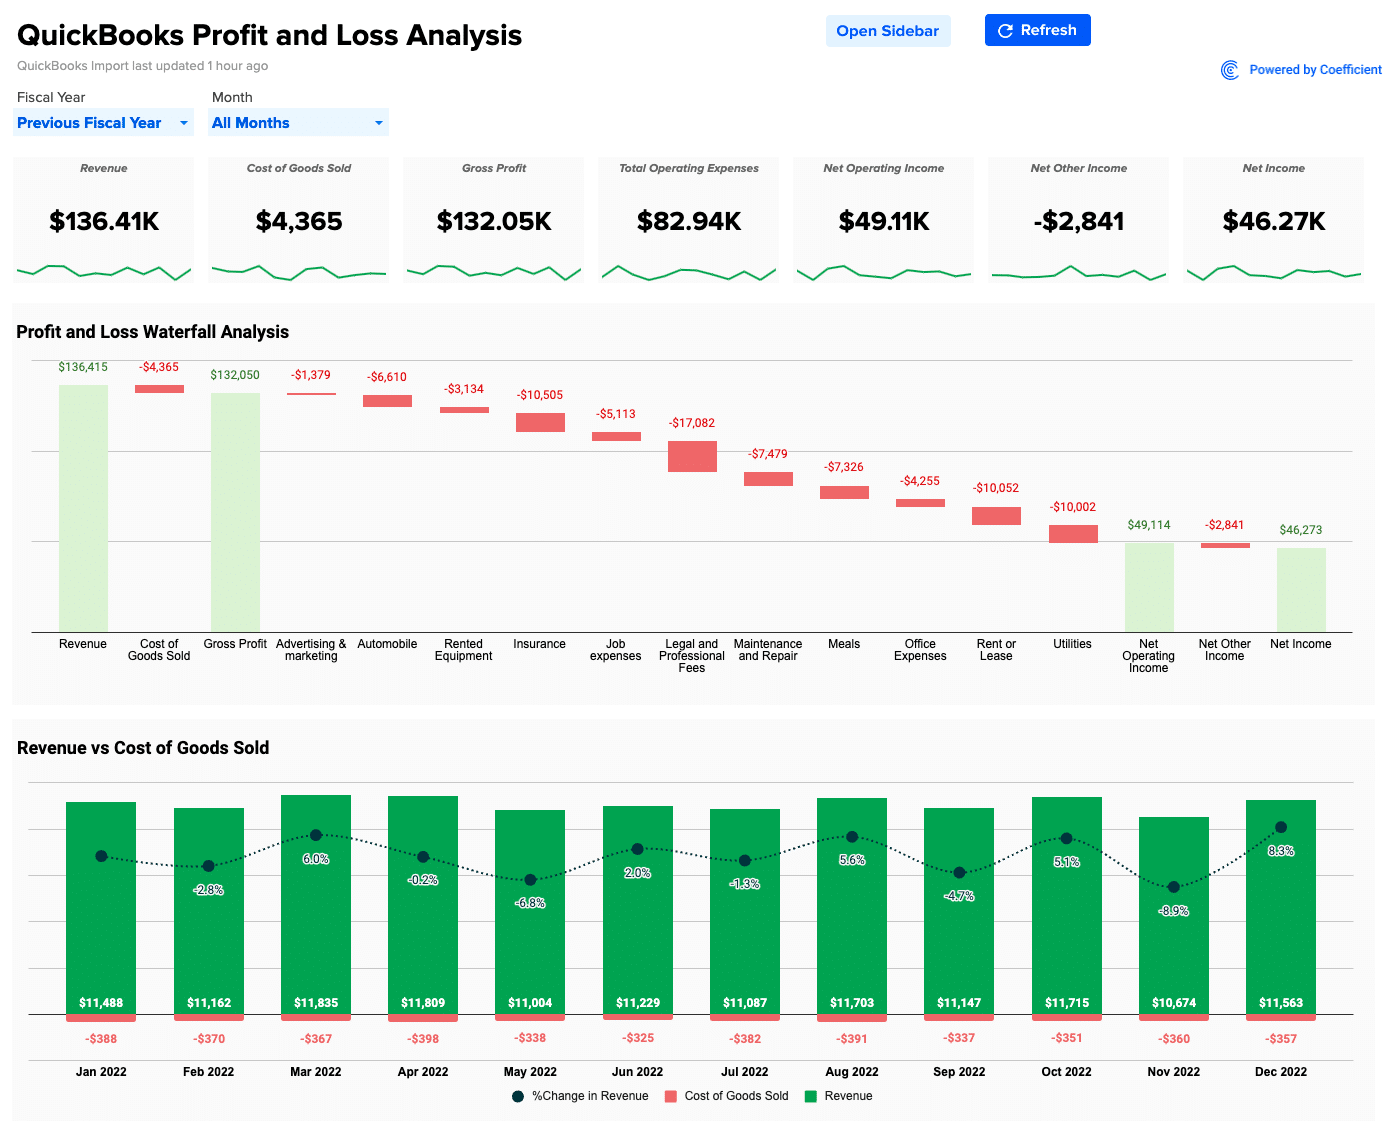 Finance professionals can use Coefficient’s QuickBooks Profit and Loss template for more comprehensive financial analyses directly in their spreadsheet! 